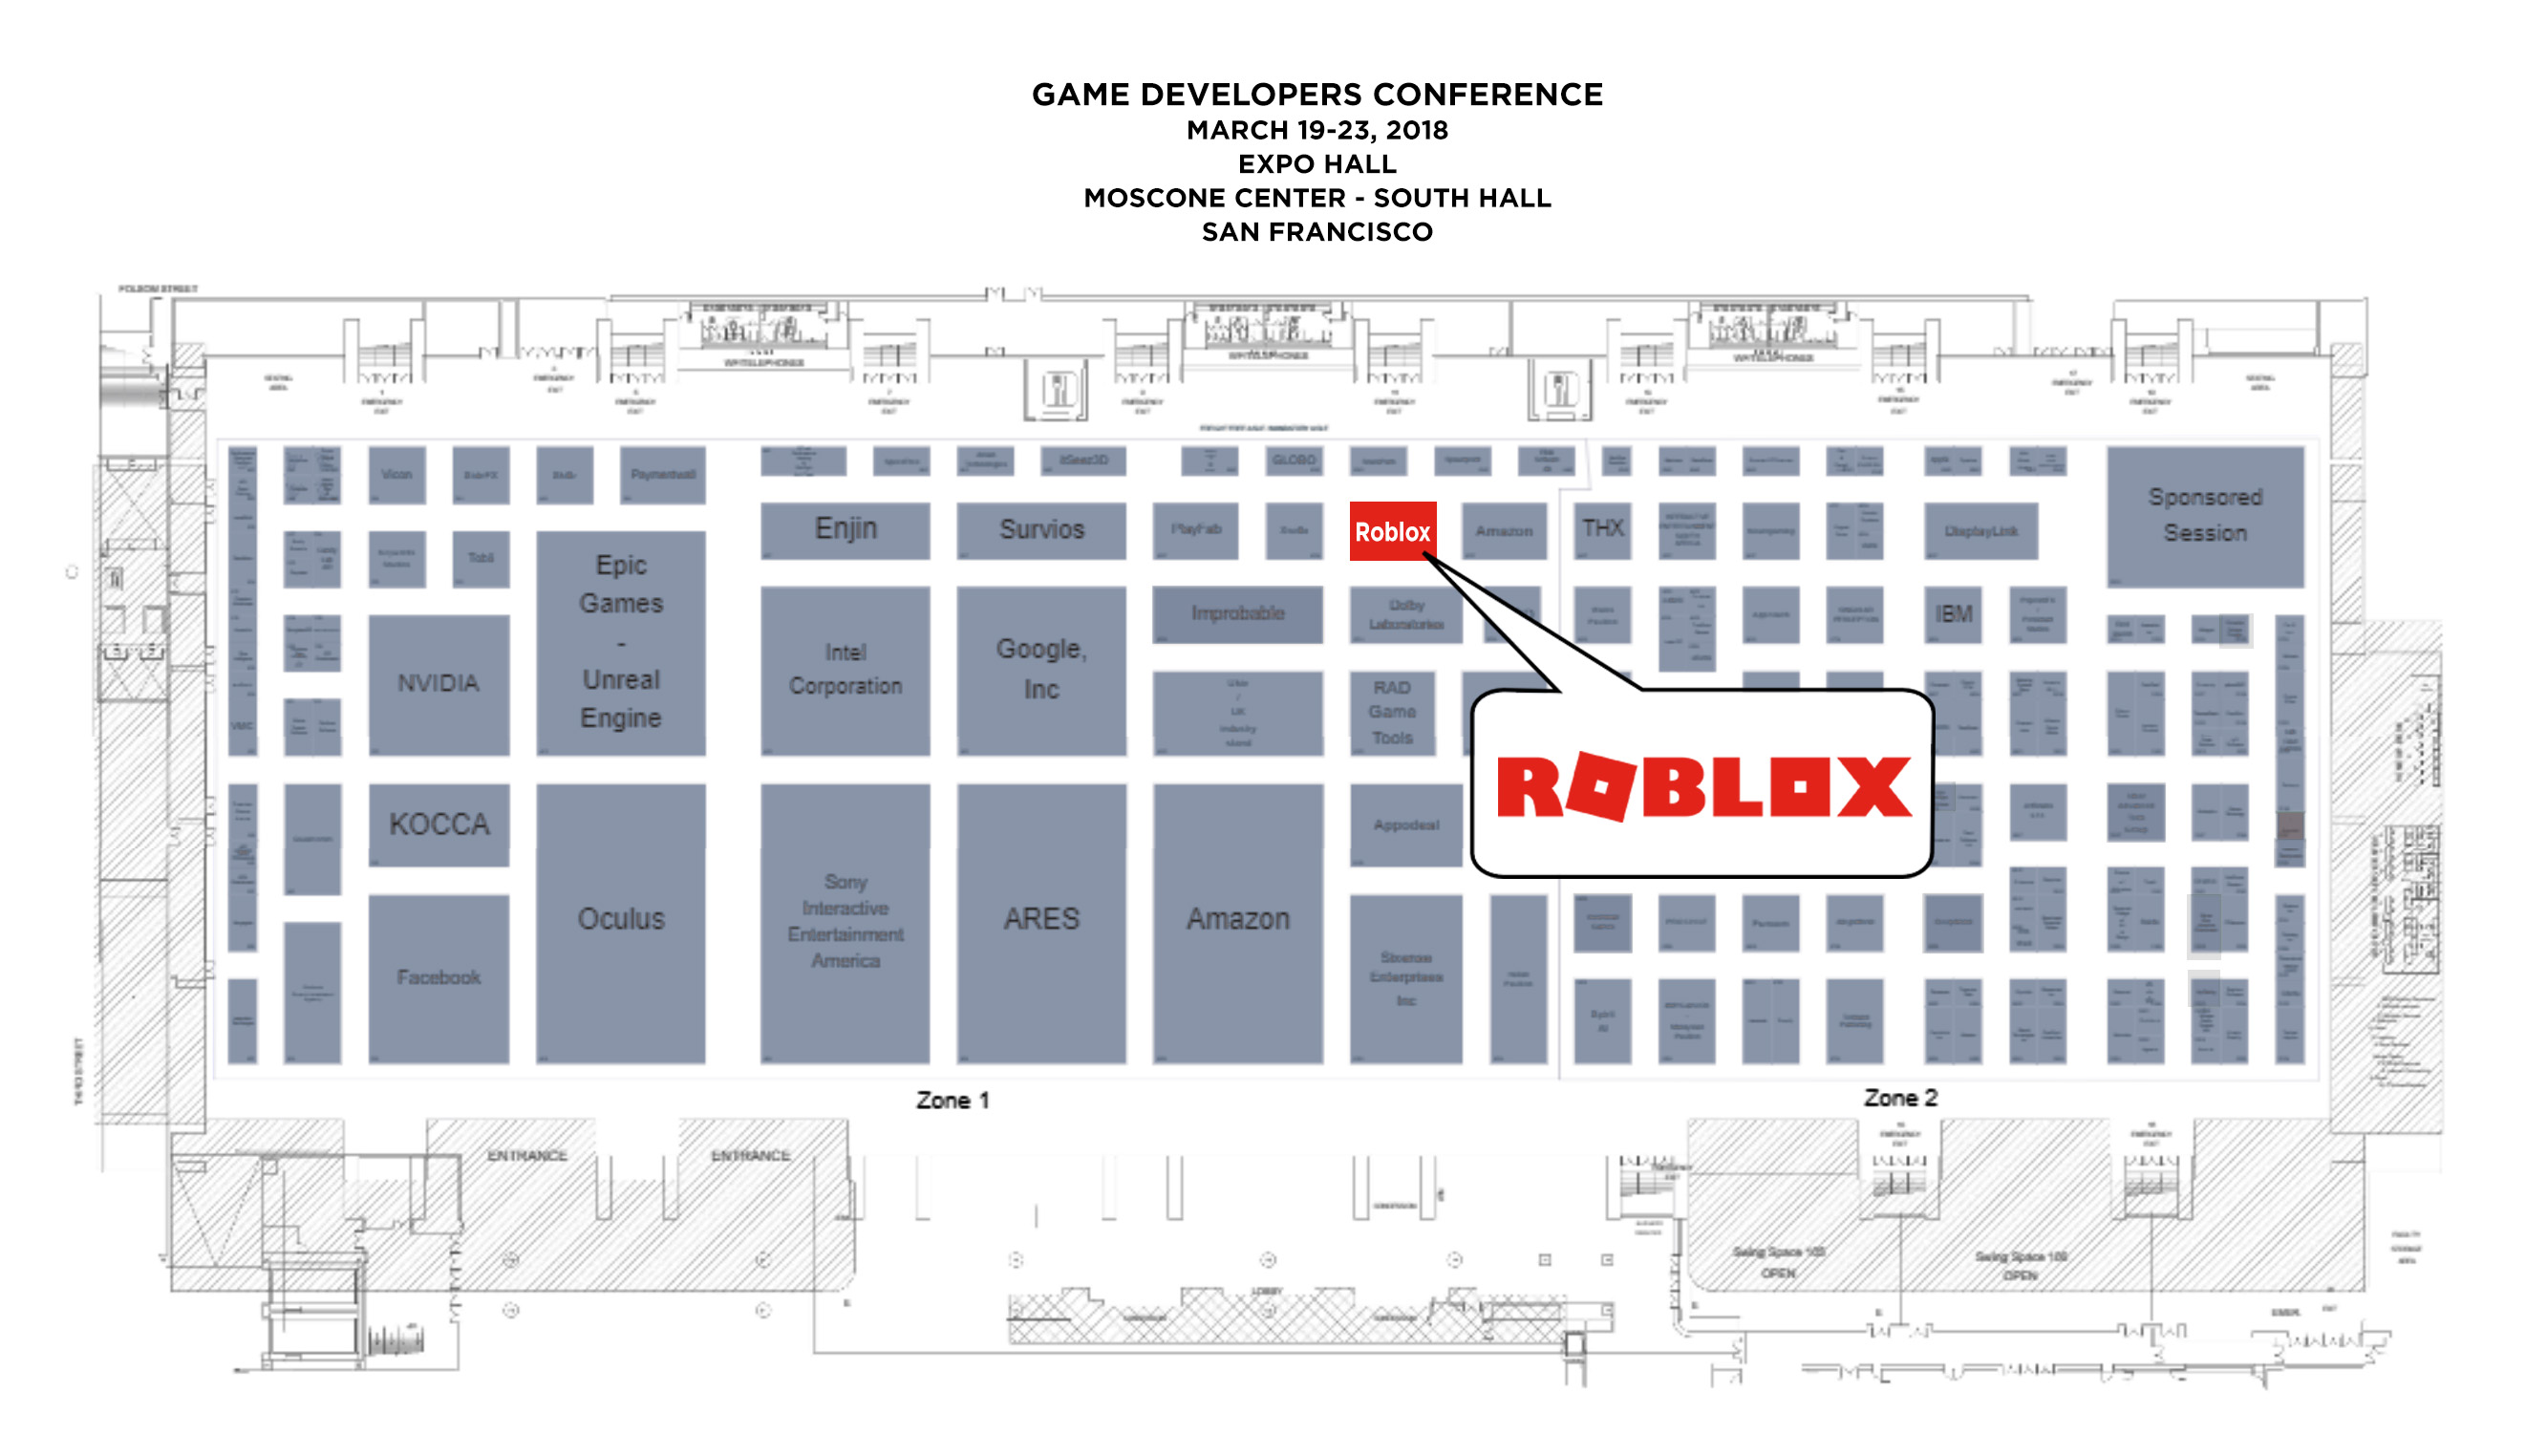 Connect With Roblox At Gdc 2018 Roblox Blog - roblox recruiting at gdc roblox blog